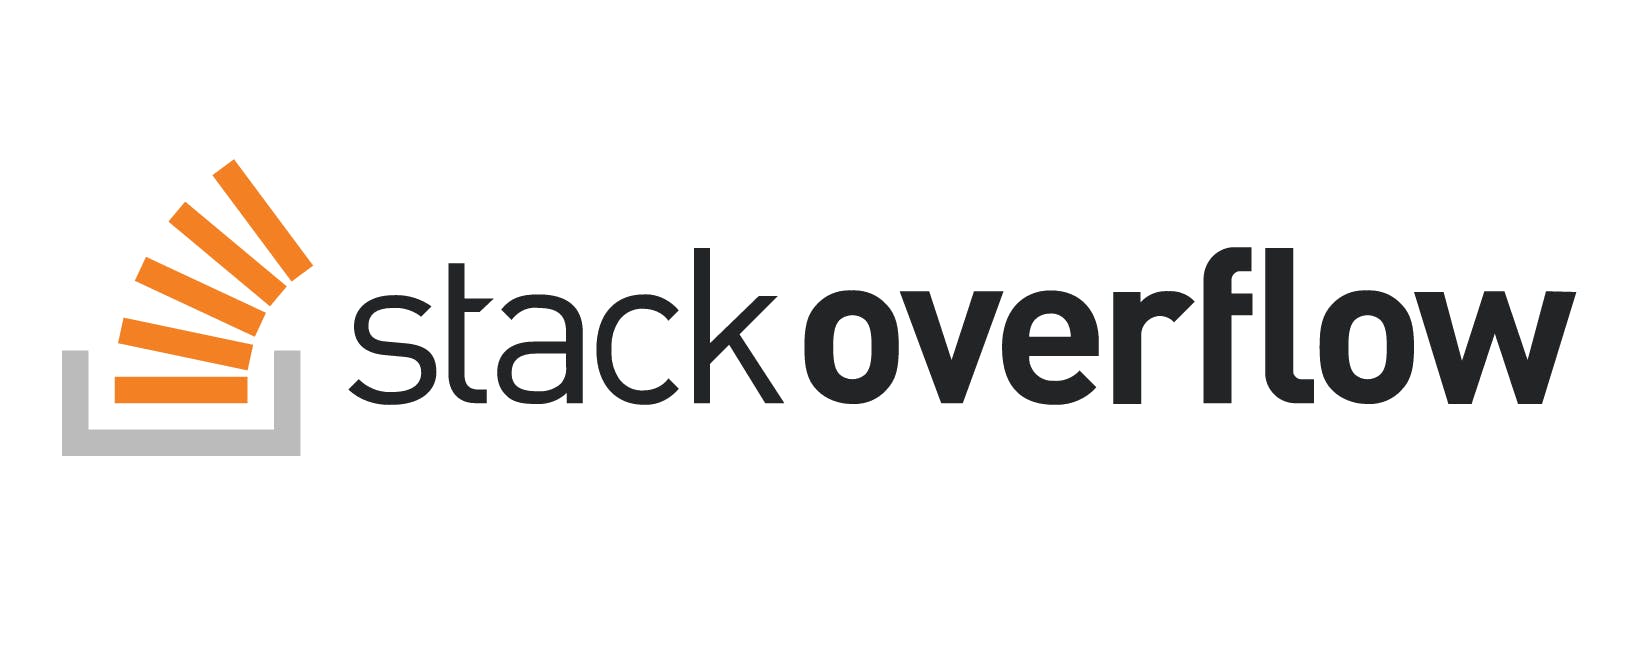 stack overflow.png